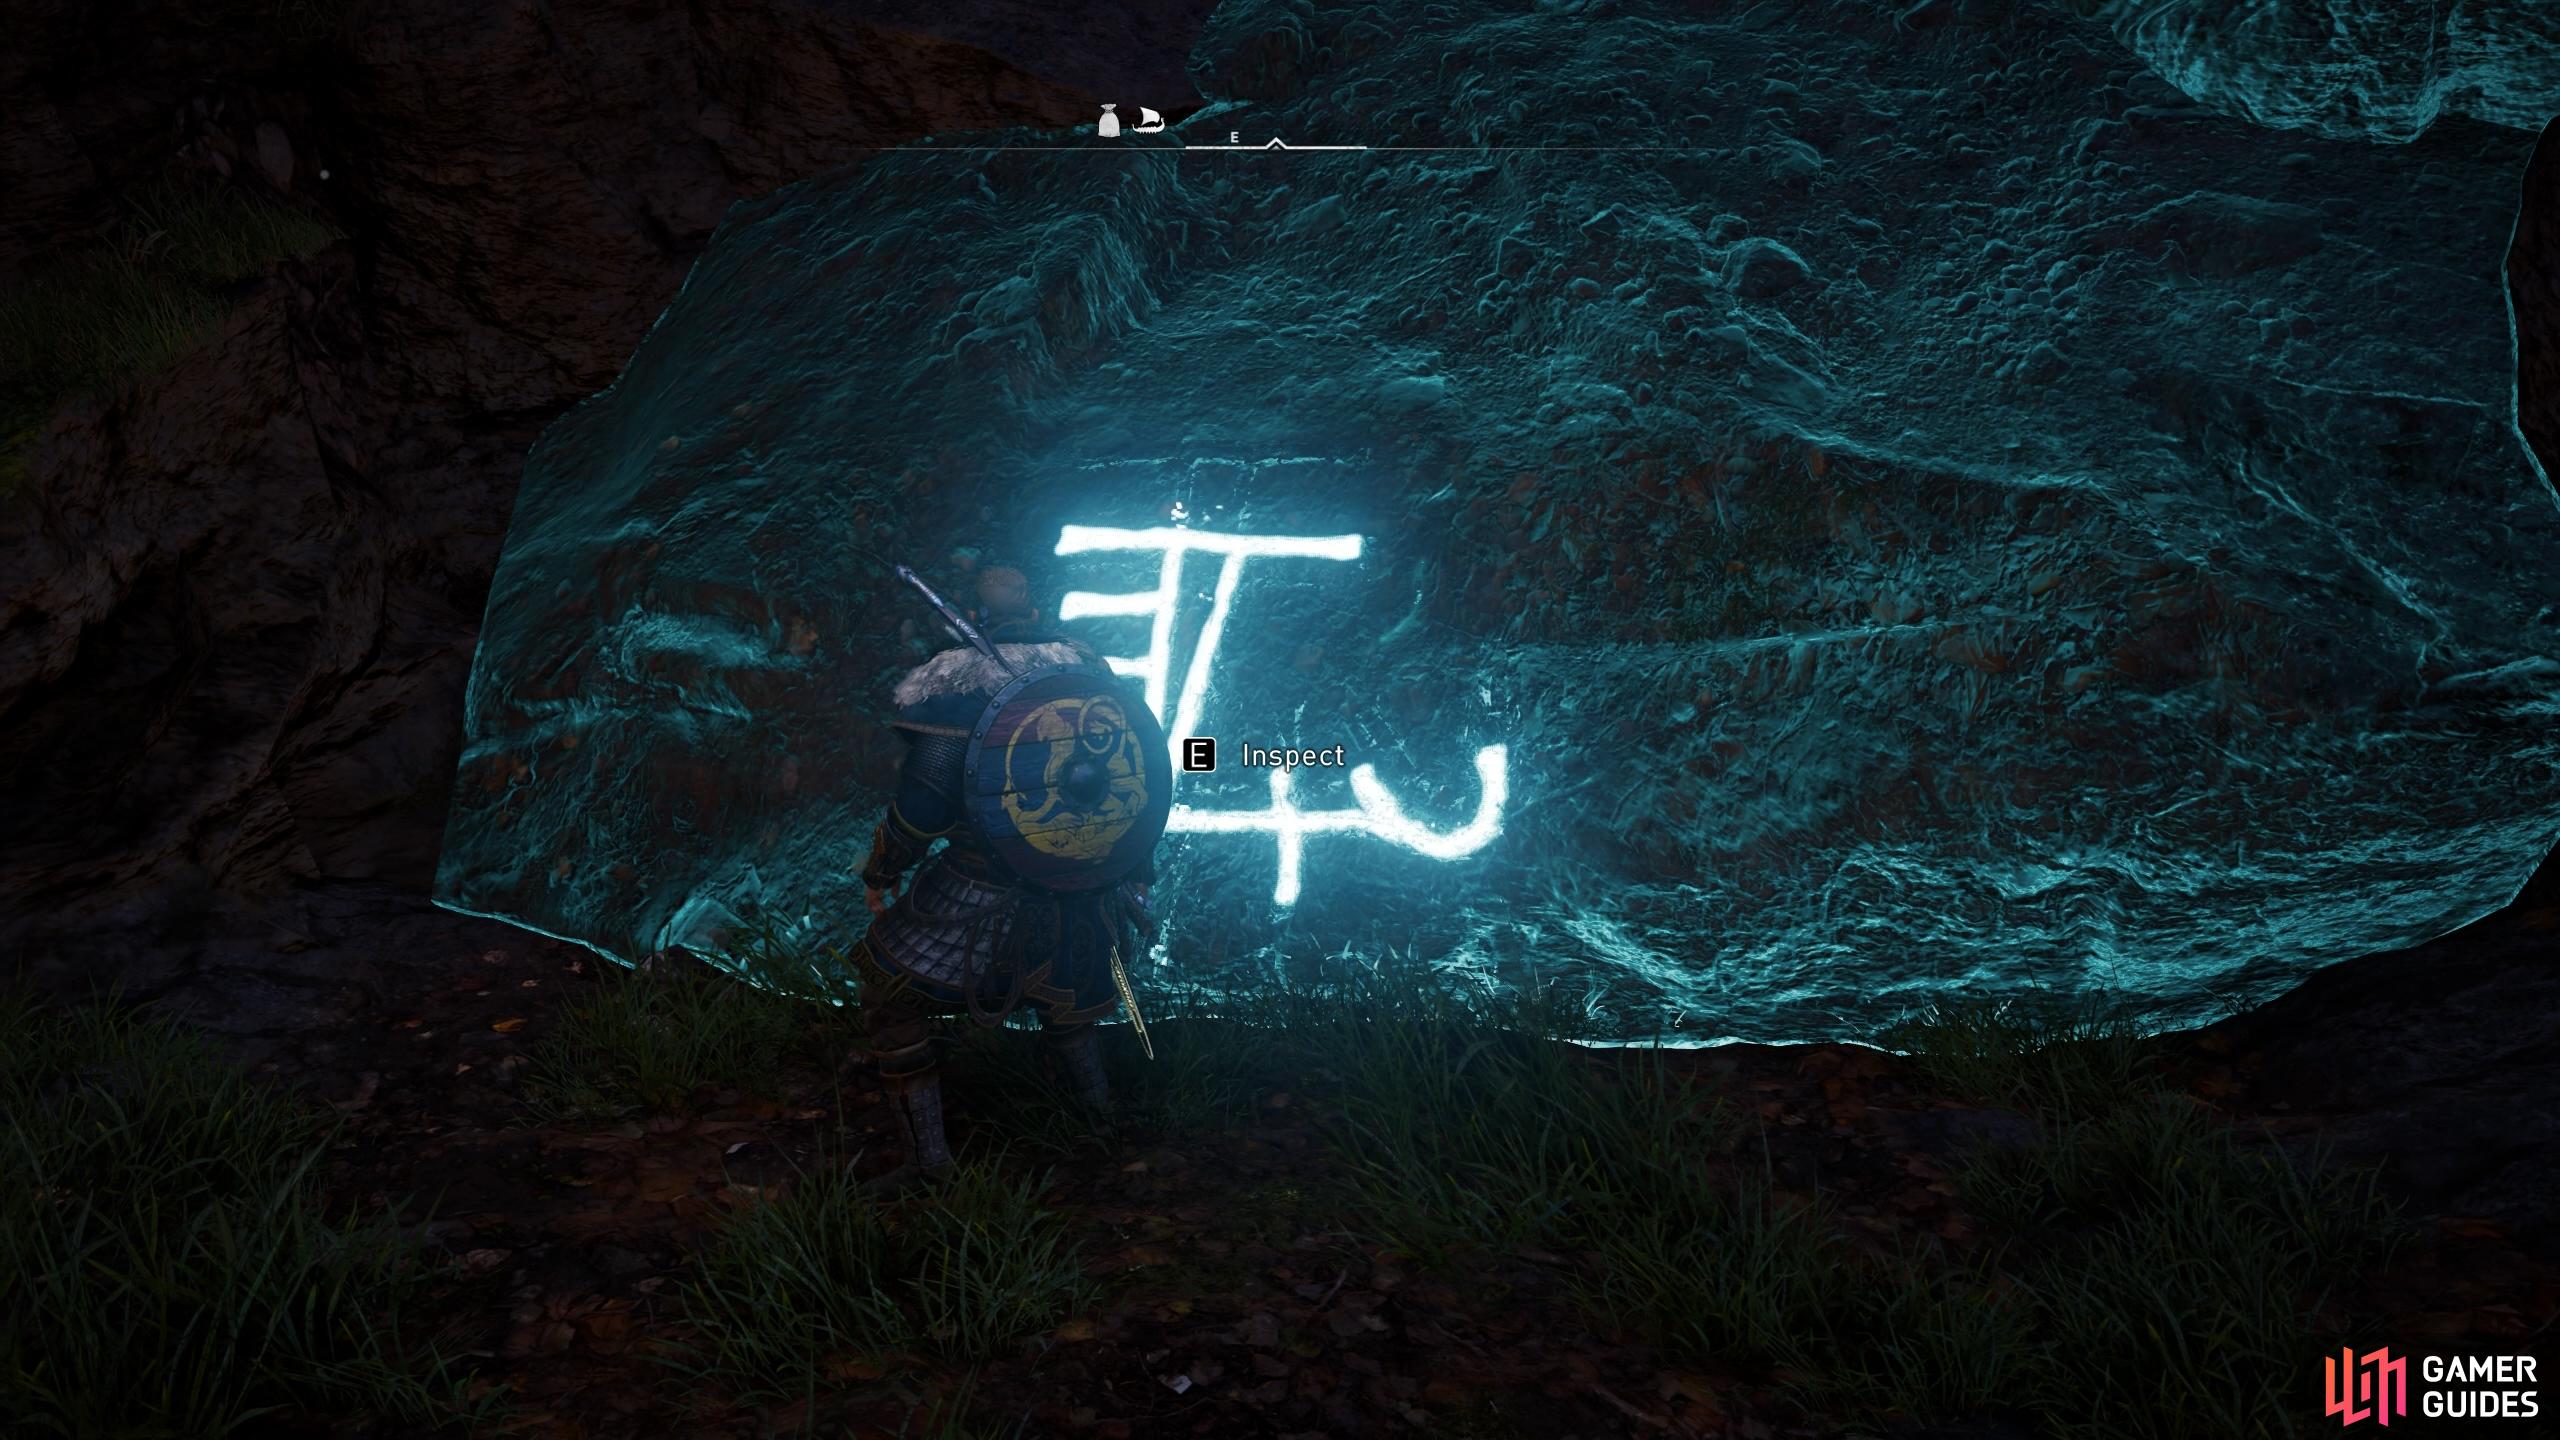 You'll need to use Odin's Sight to highlight the runic inscription, then interact with it to reveal the entrance.